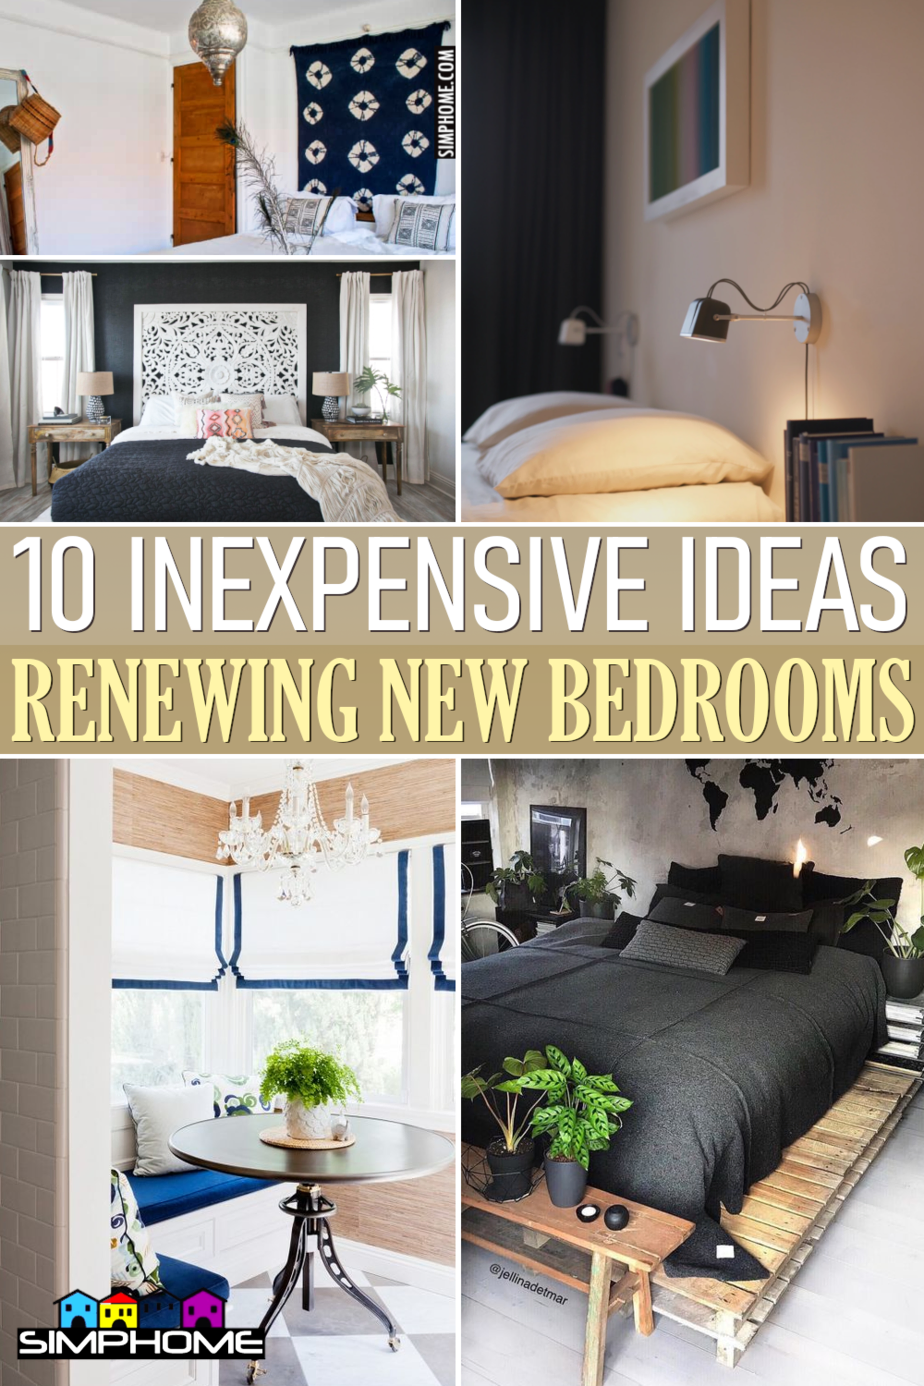 10 Inexpensive Ideas to renew bedroom by Simphome.comFeatured